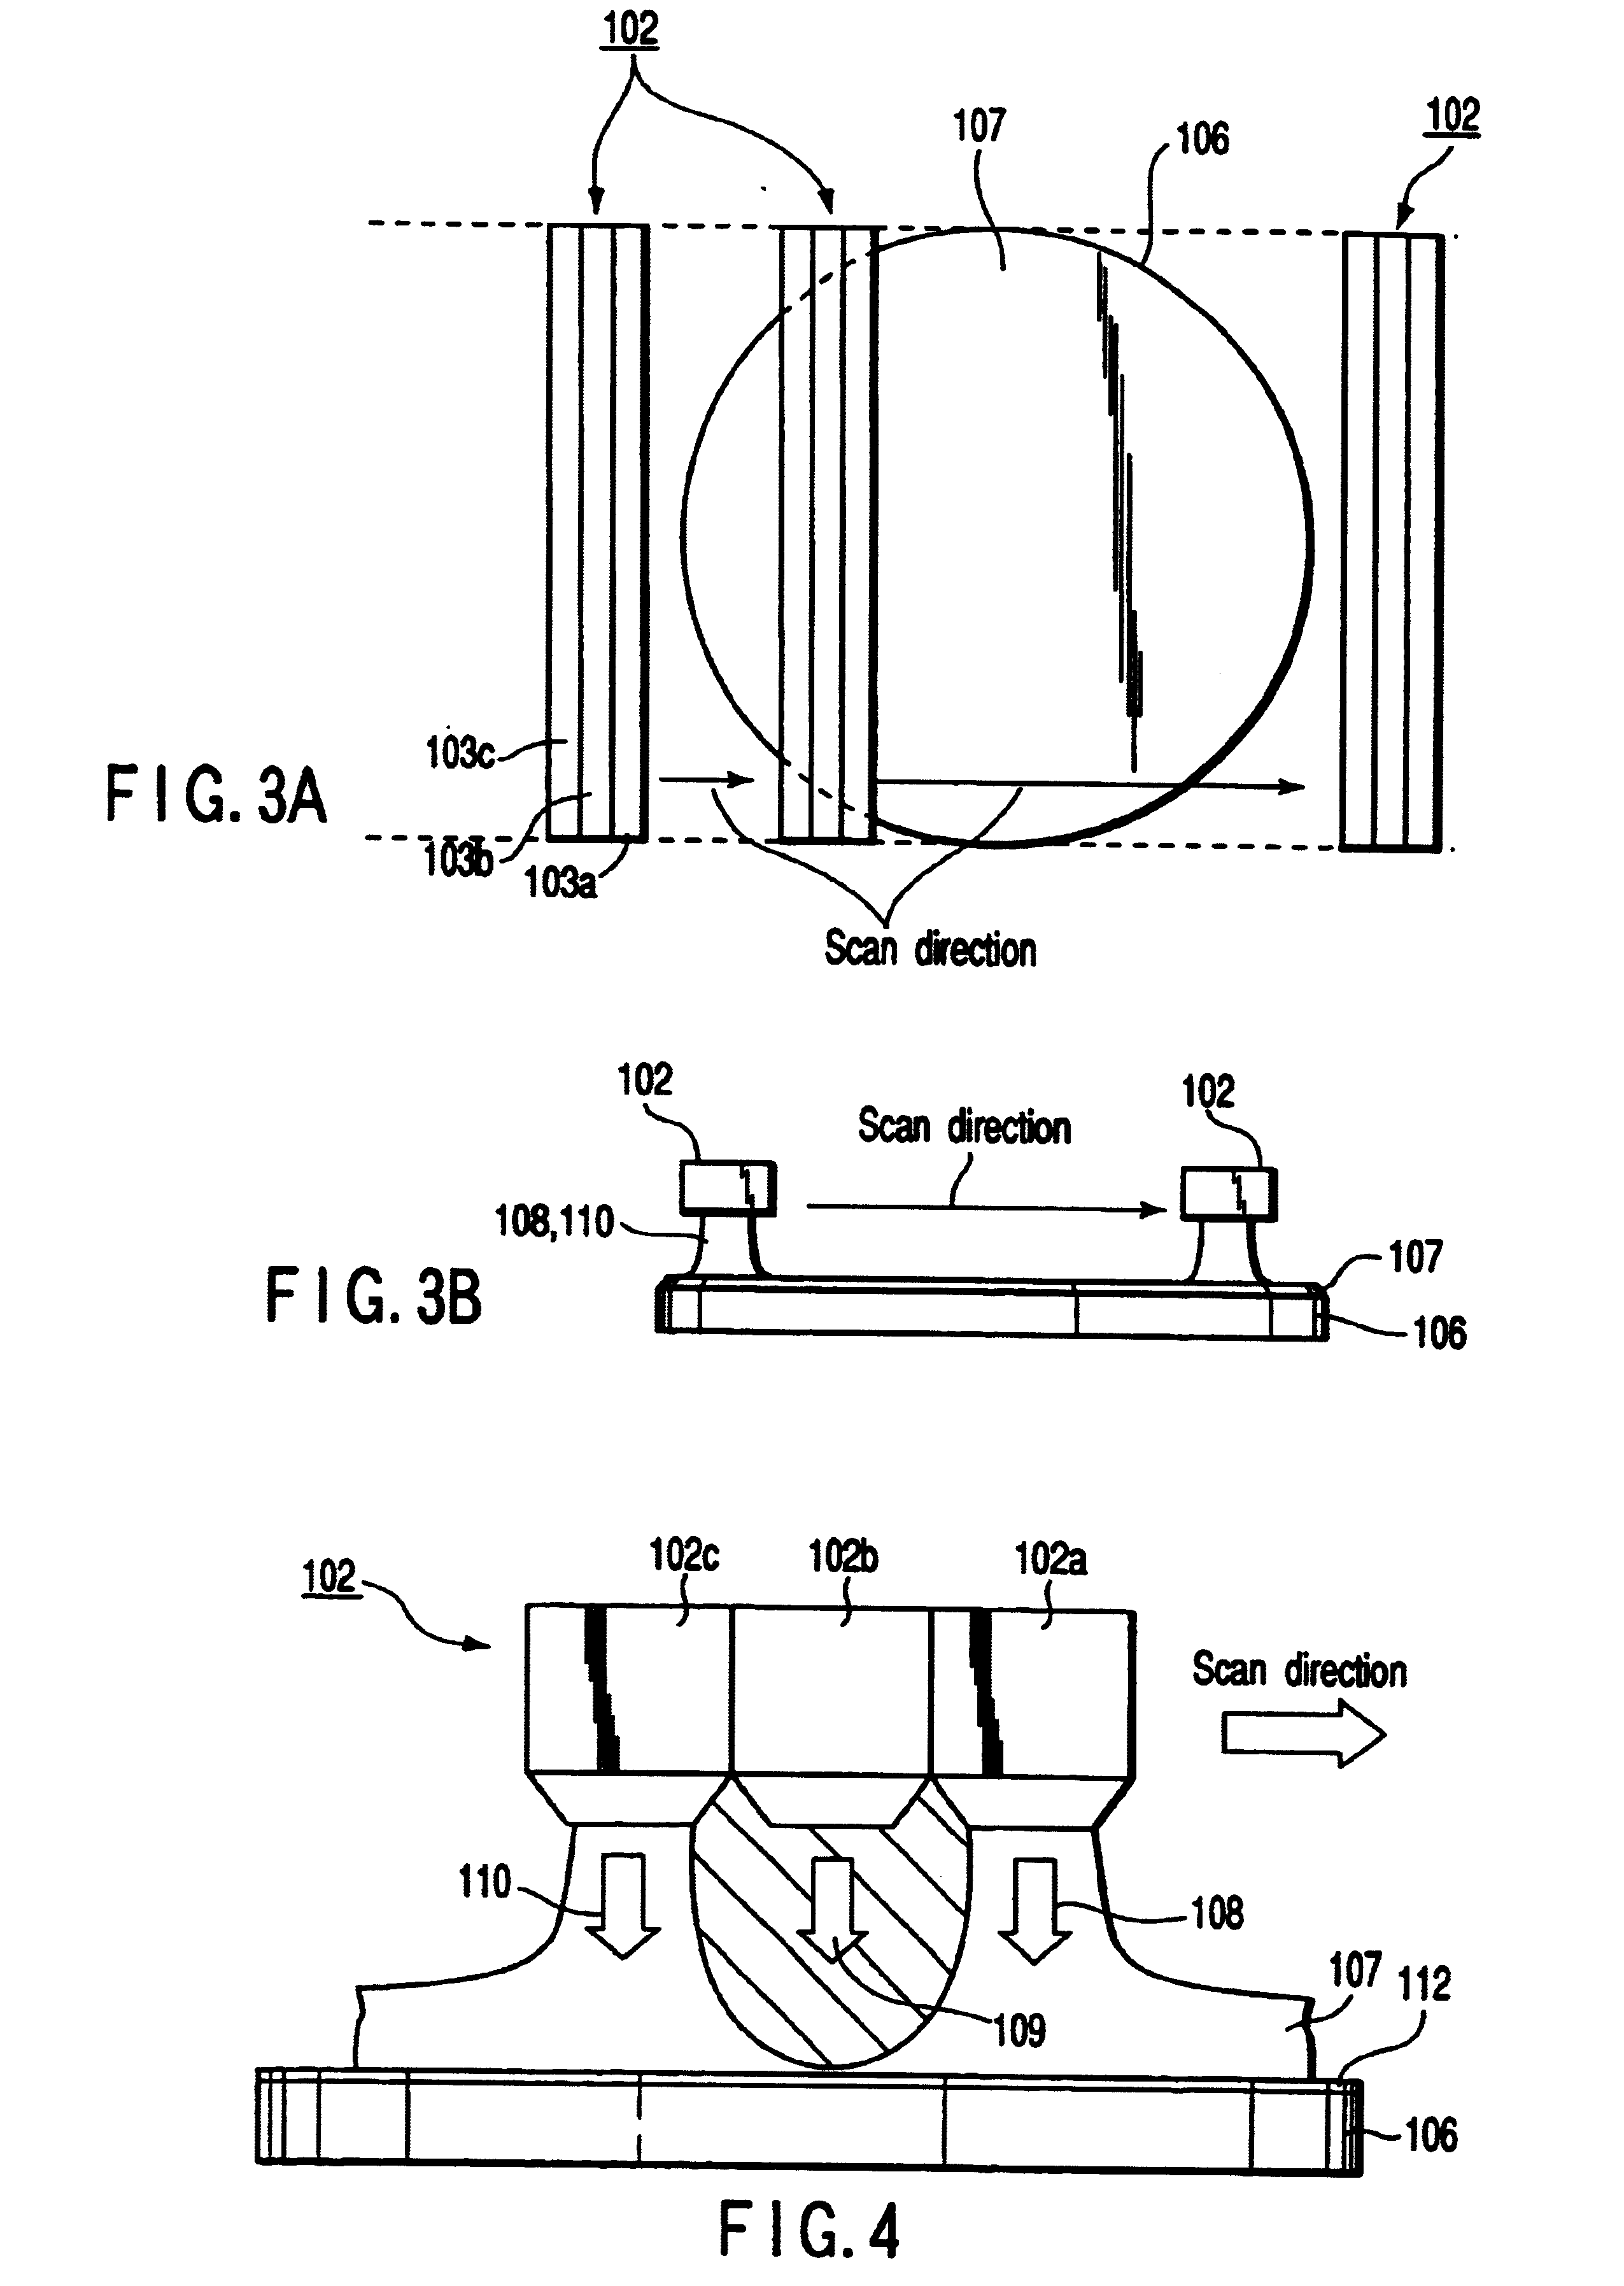 Substrate treating method, substrate-processing apparatus, developing method, method of manufacturing a semiconductor device, and method of cleaning a developing solution nozzle